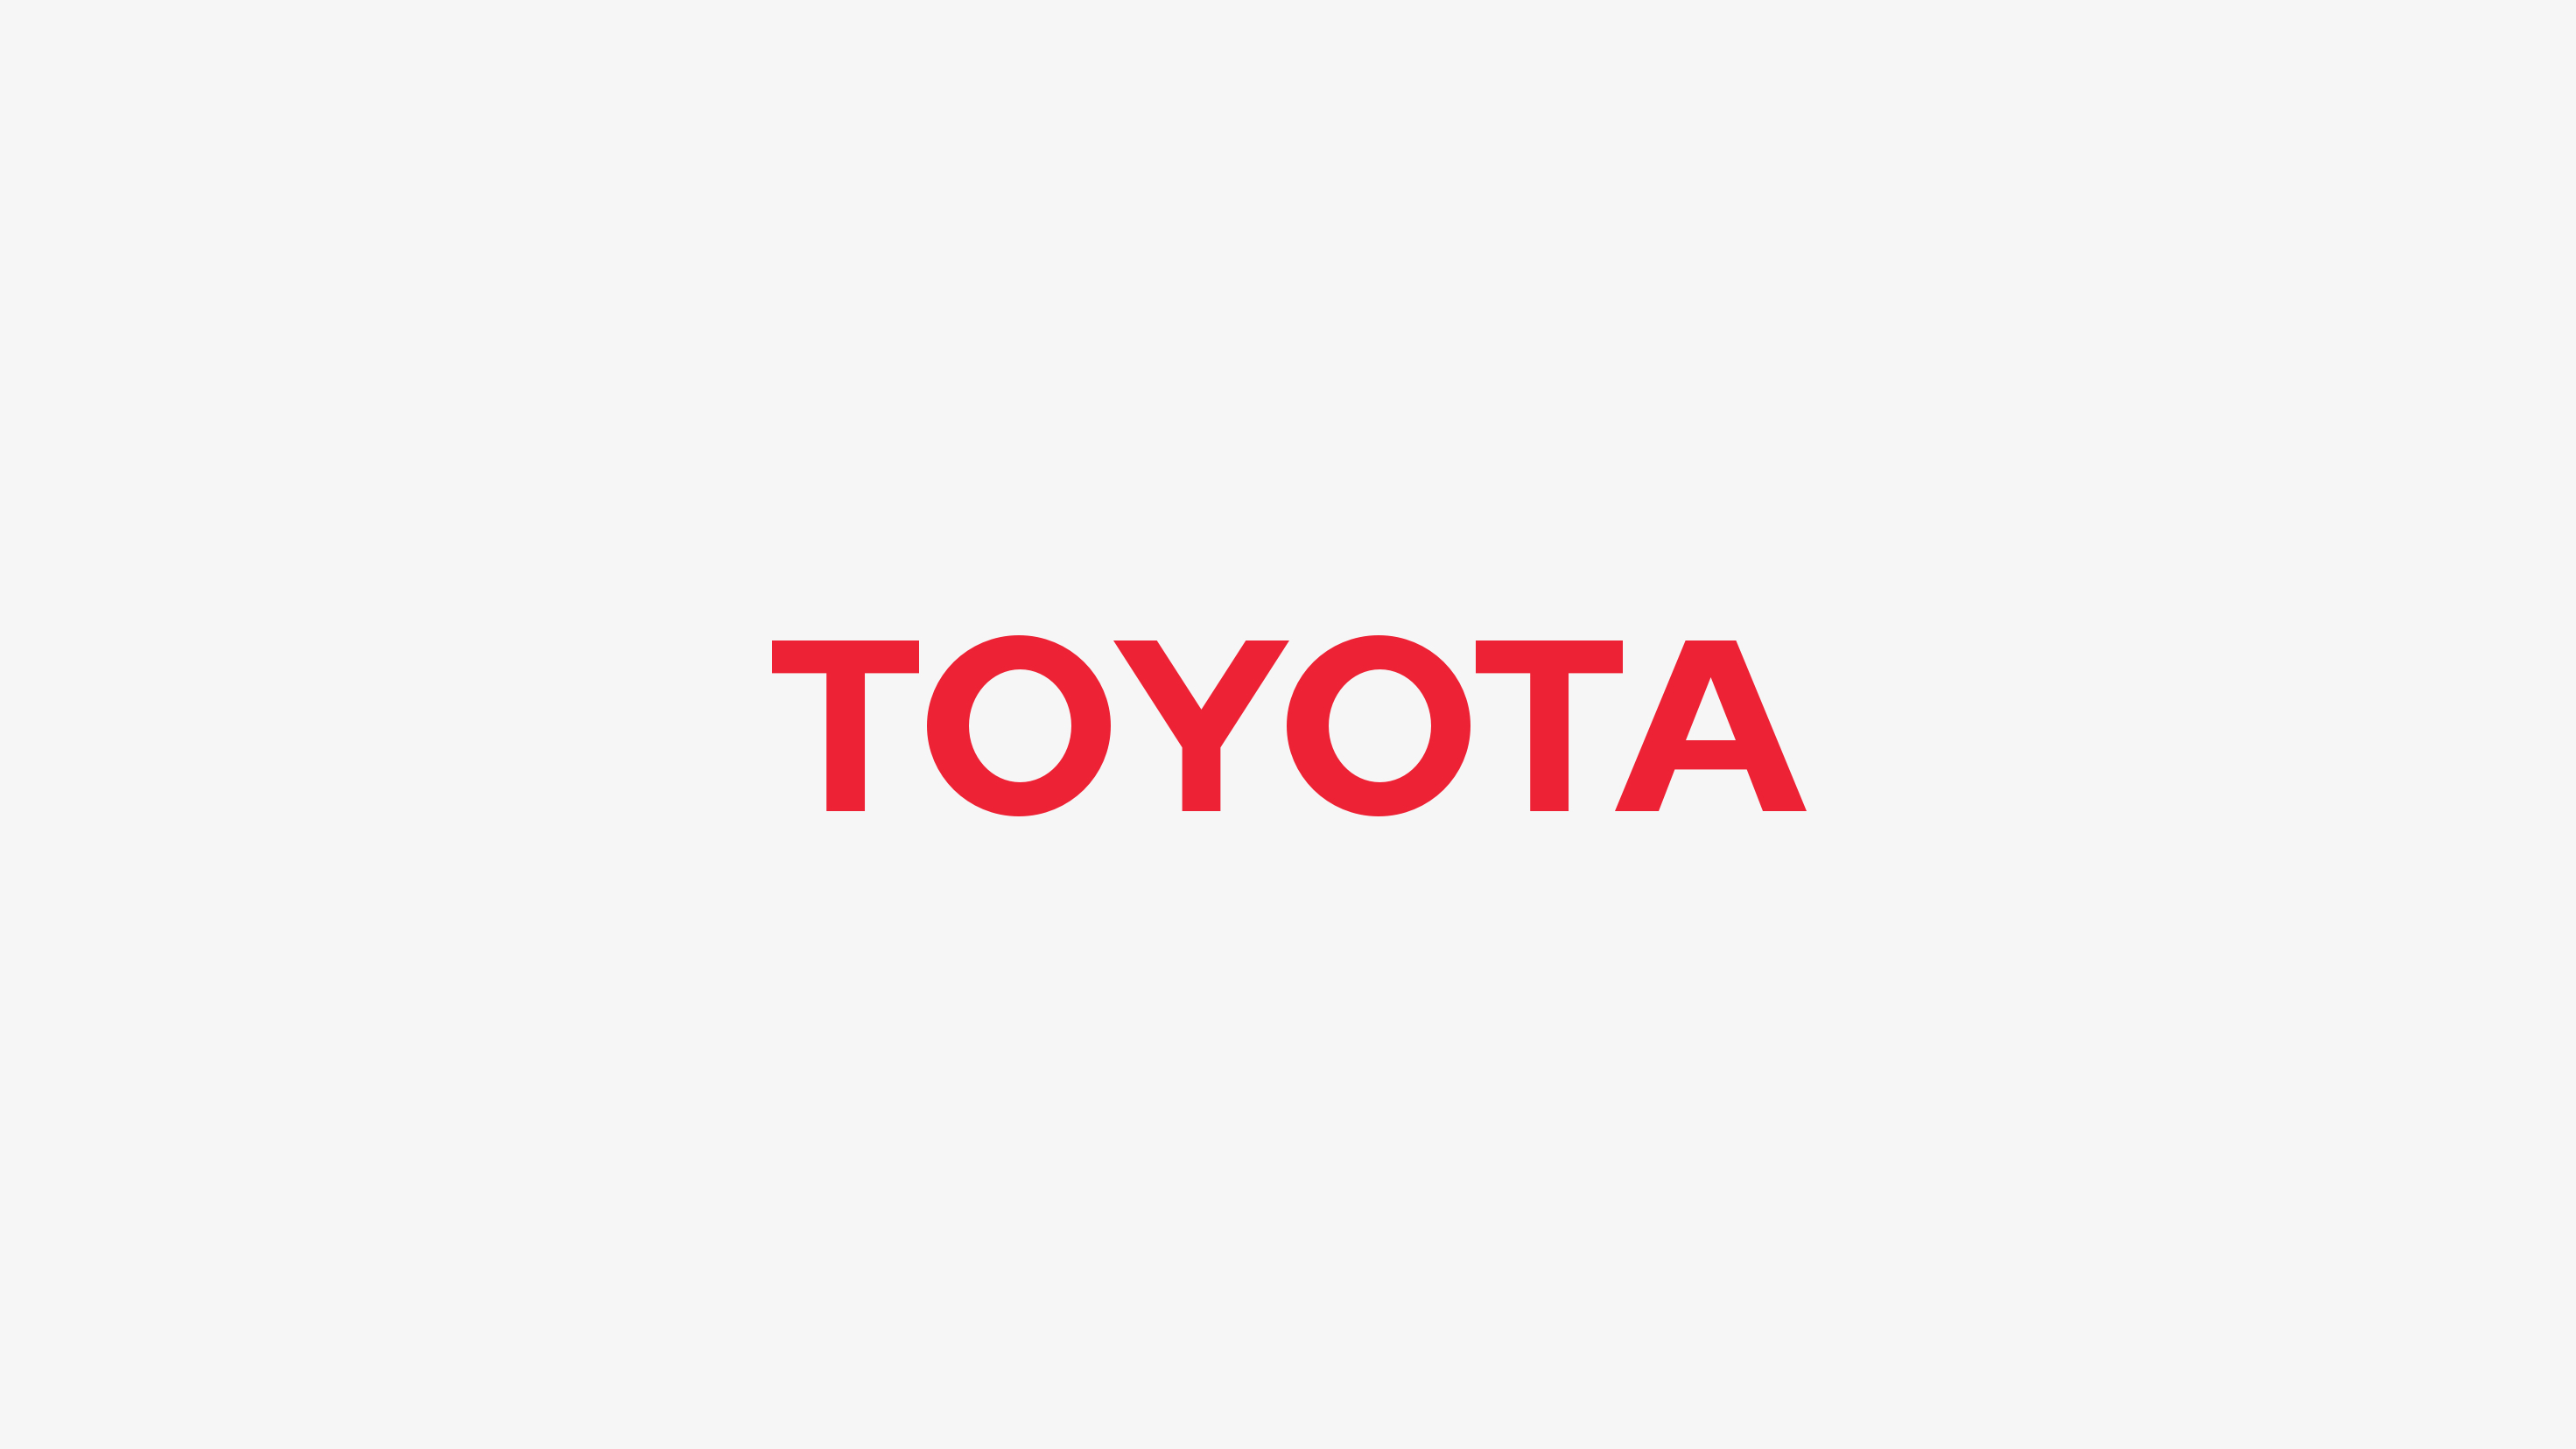 2015 Toyota North American Environmental Report – Toyota Celebrates Energy Excellence for 11th Consecutive Year